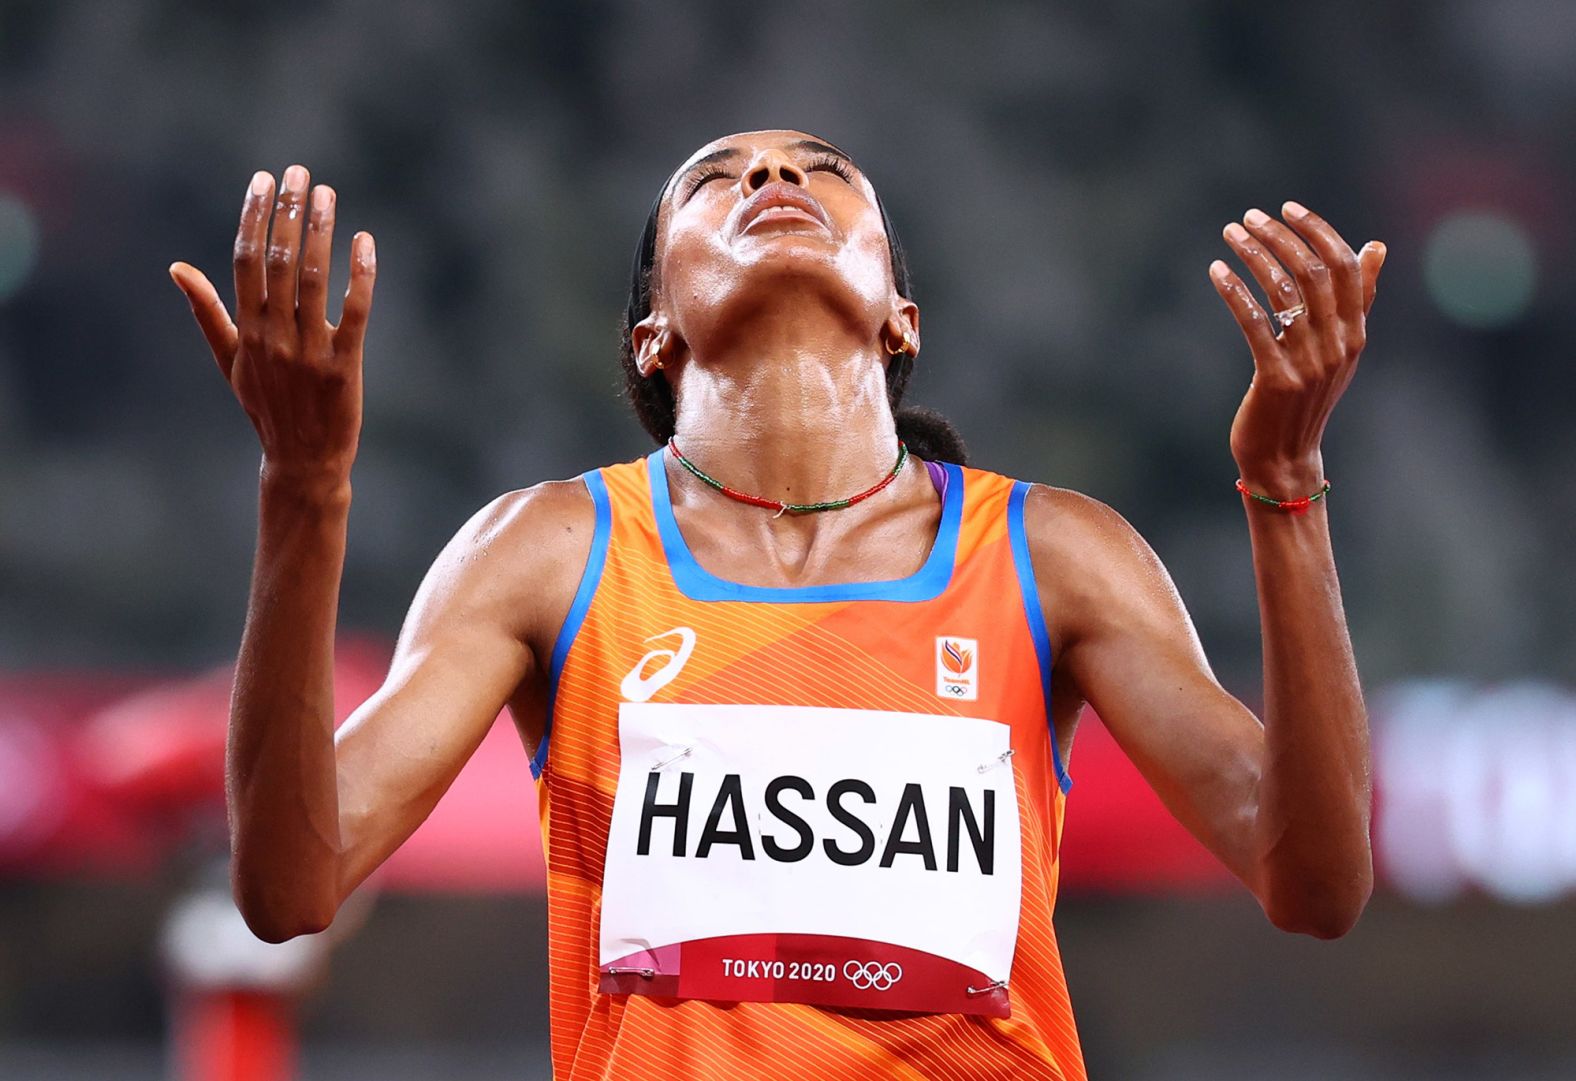 Dutch runner Sifan Hassan celebrates after winning <a href="index.php?page=&url=https%3A%2F%2Fwww.cnn.com%2Fworld%2Flive-news%2Ftokyo-2020-olympics-08-01-21-spt%2Fh_7420134ef52384301a9248b1d162bb5f" target="_blank">her 1,500-meter heat</a> on August 2. Hassan won despite falling down at the beginning of the last lap. She tripped over another runner but got up and raced past the field.